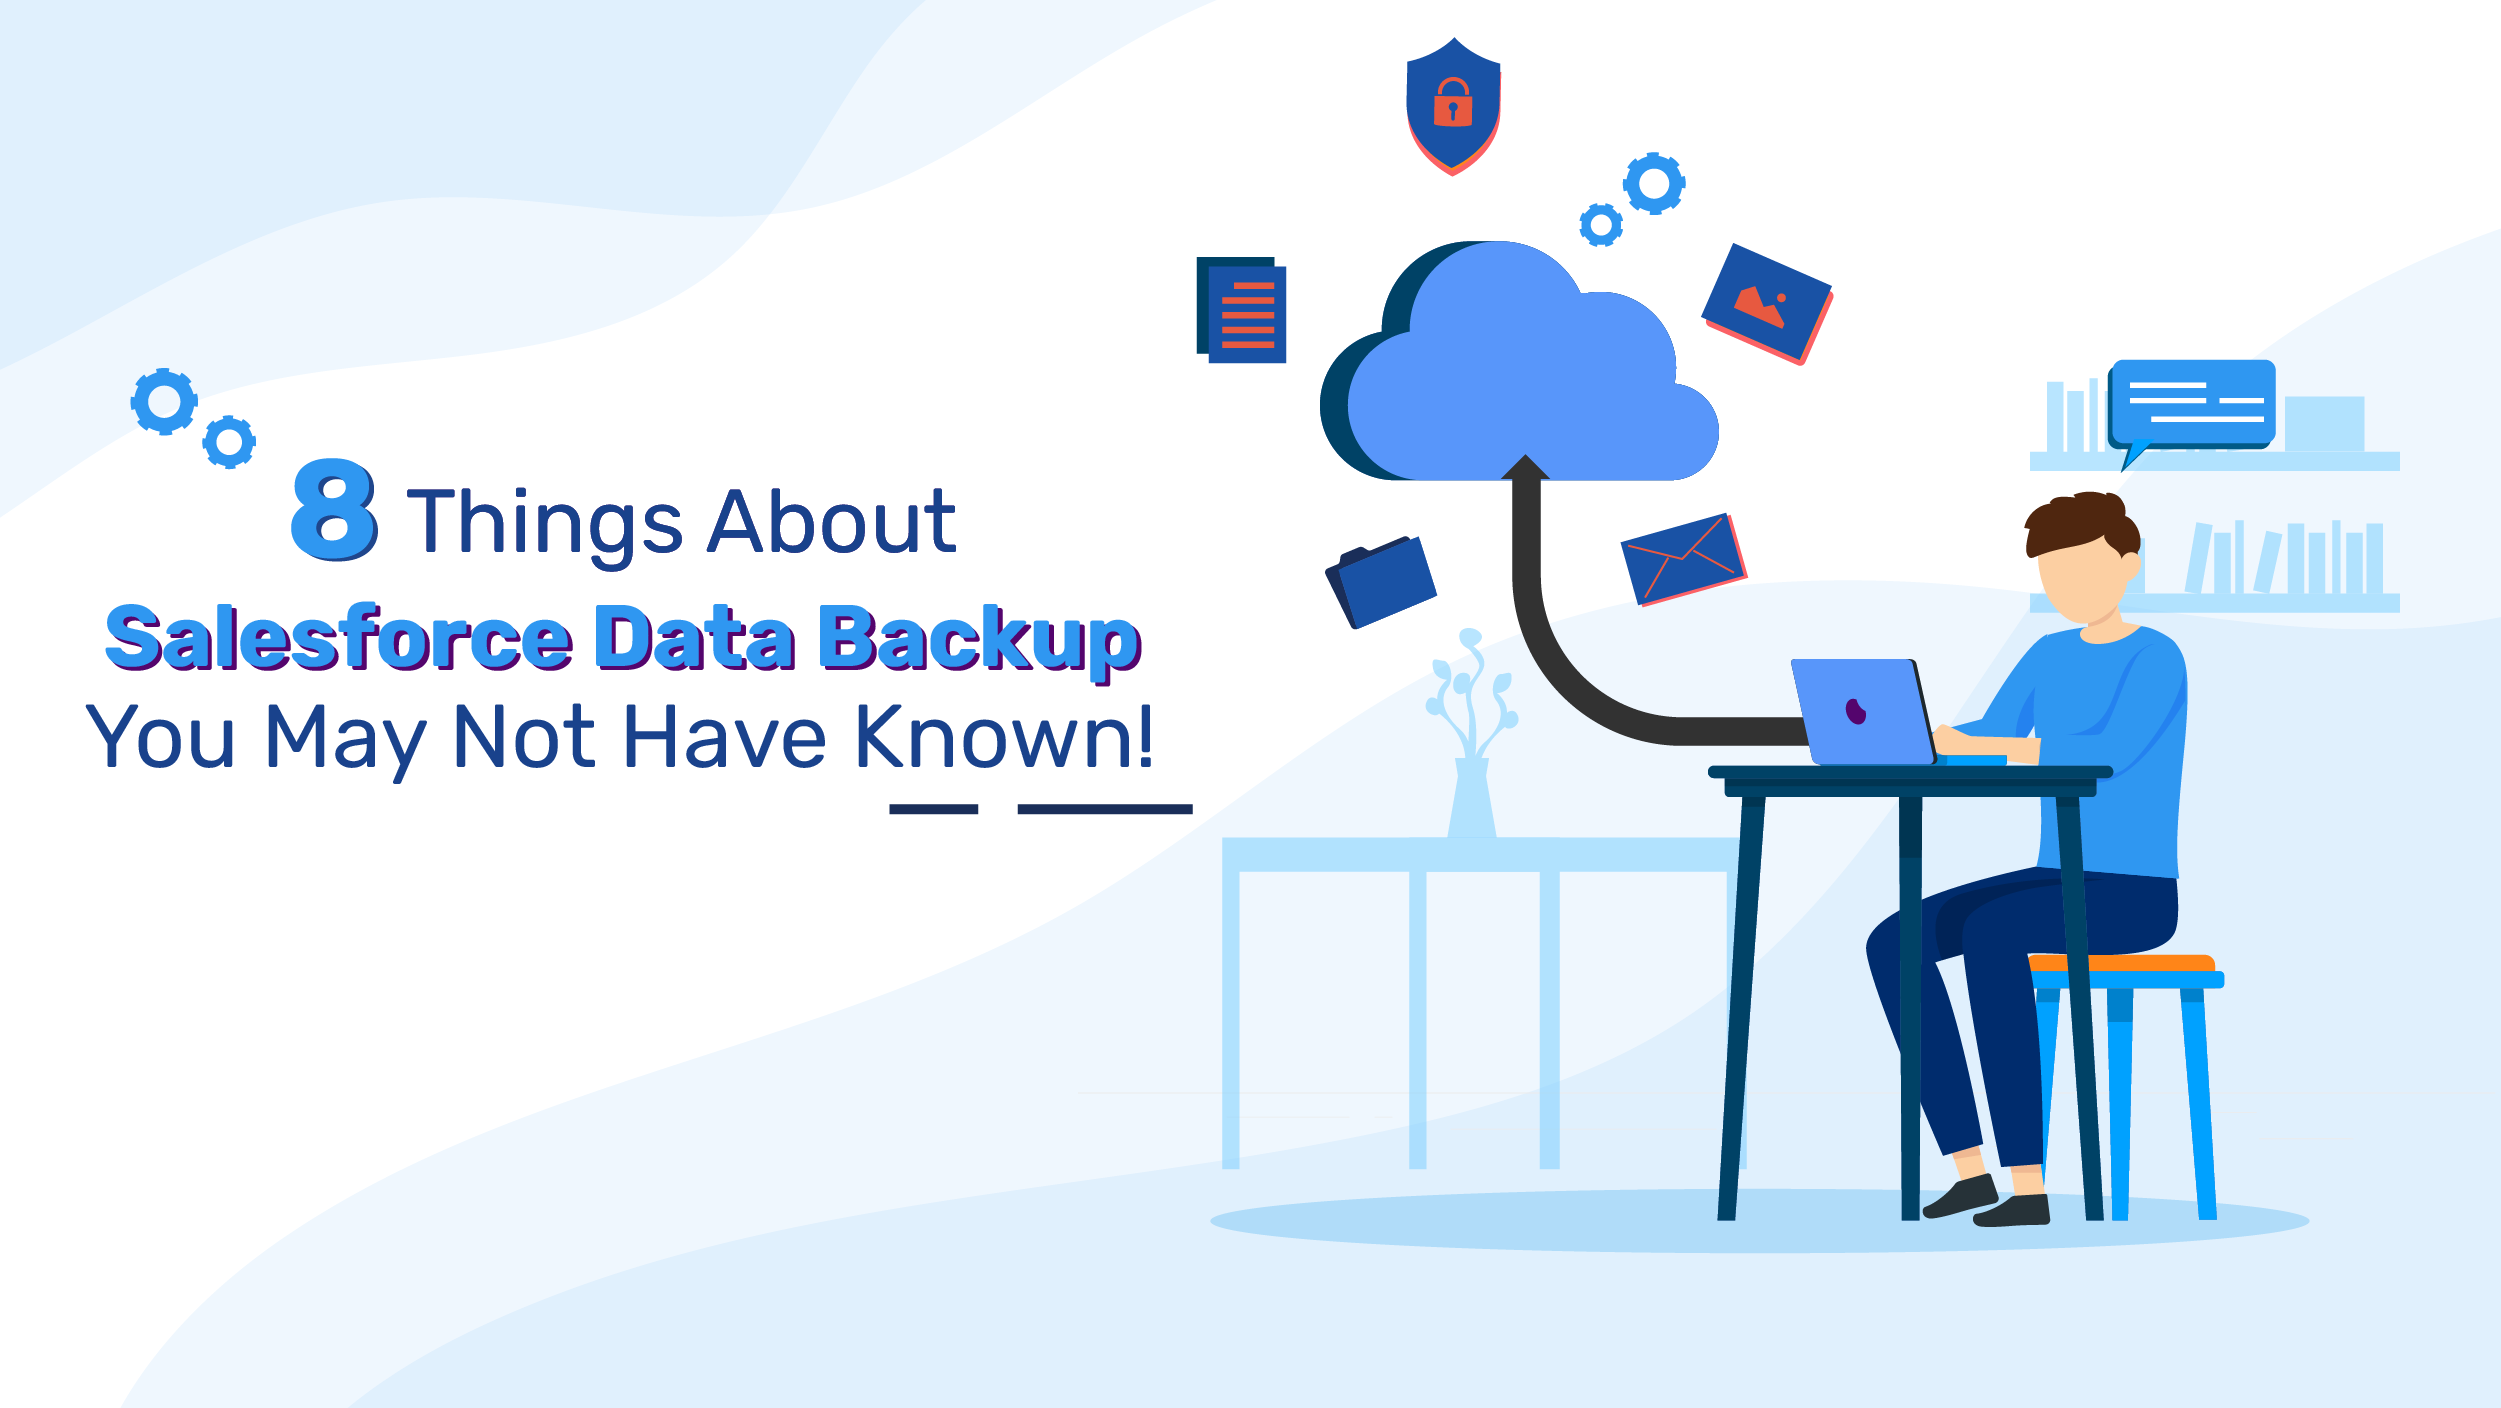 8 Things About Salesforce Data Backup You May Not Have Known!